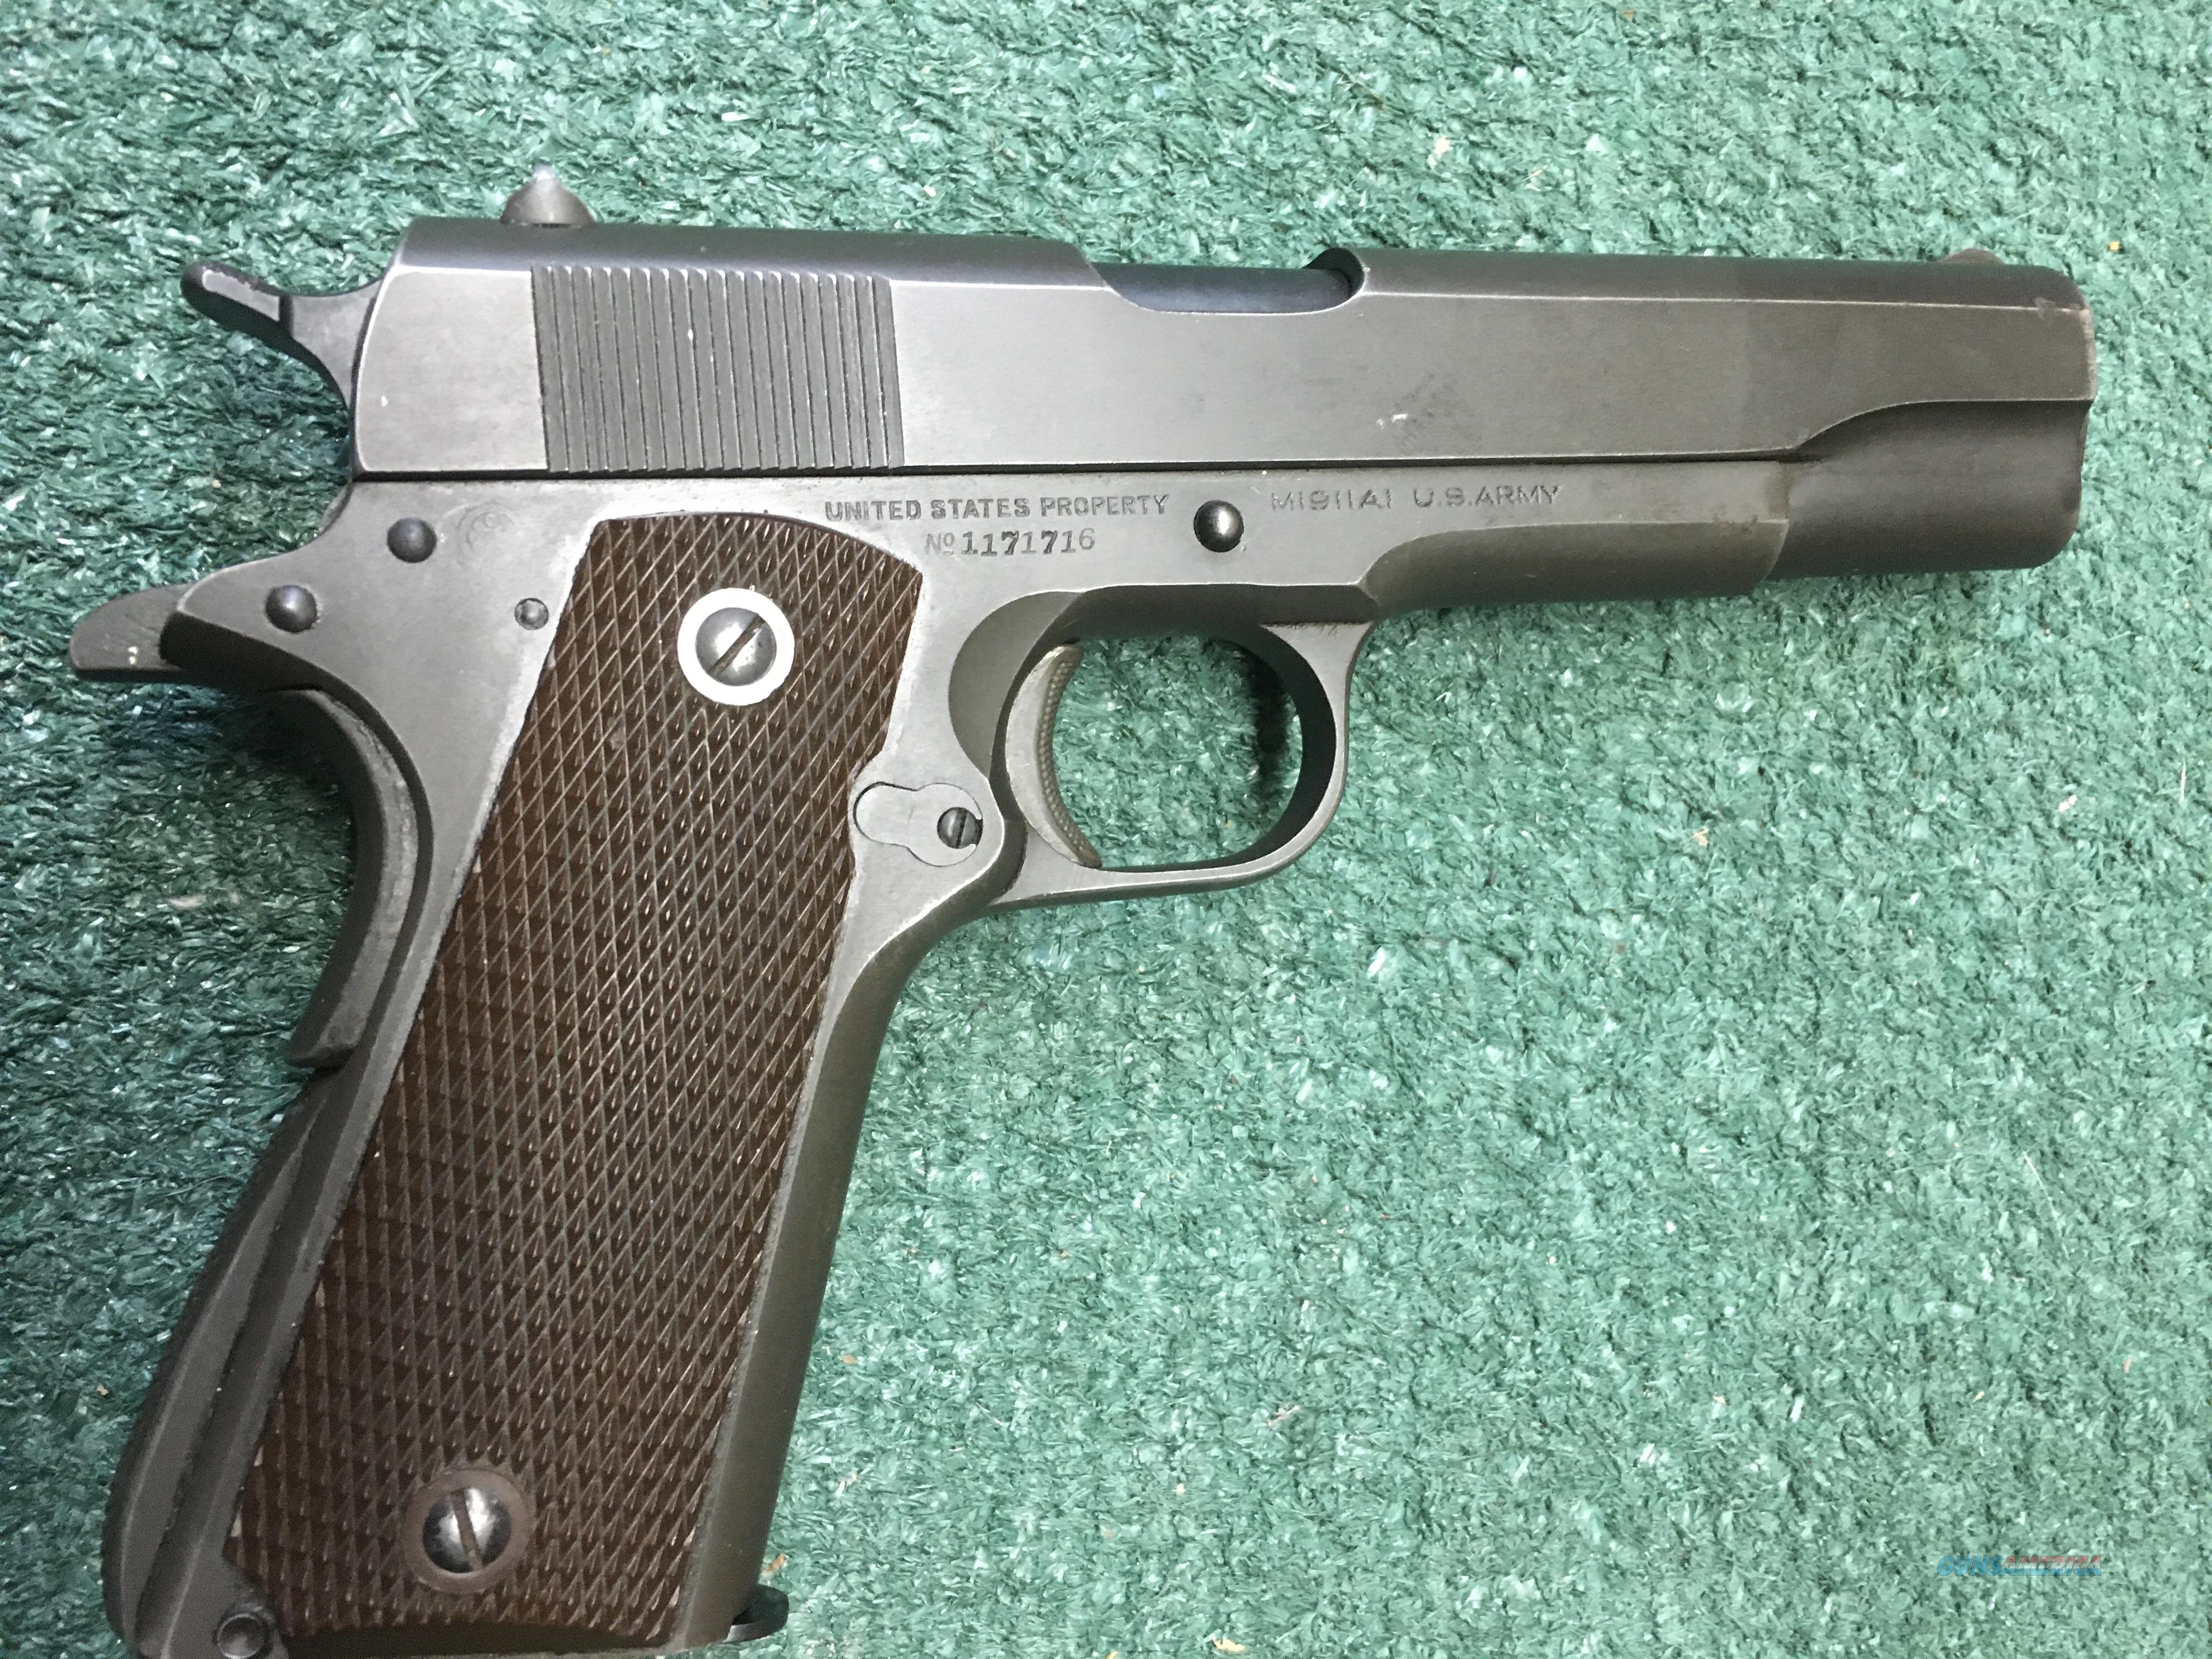 Colt 1911a1 Us Army 45 Acp Ghd For Sale At 909586530 7196